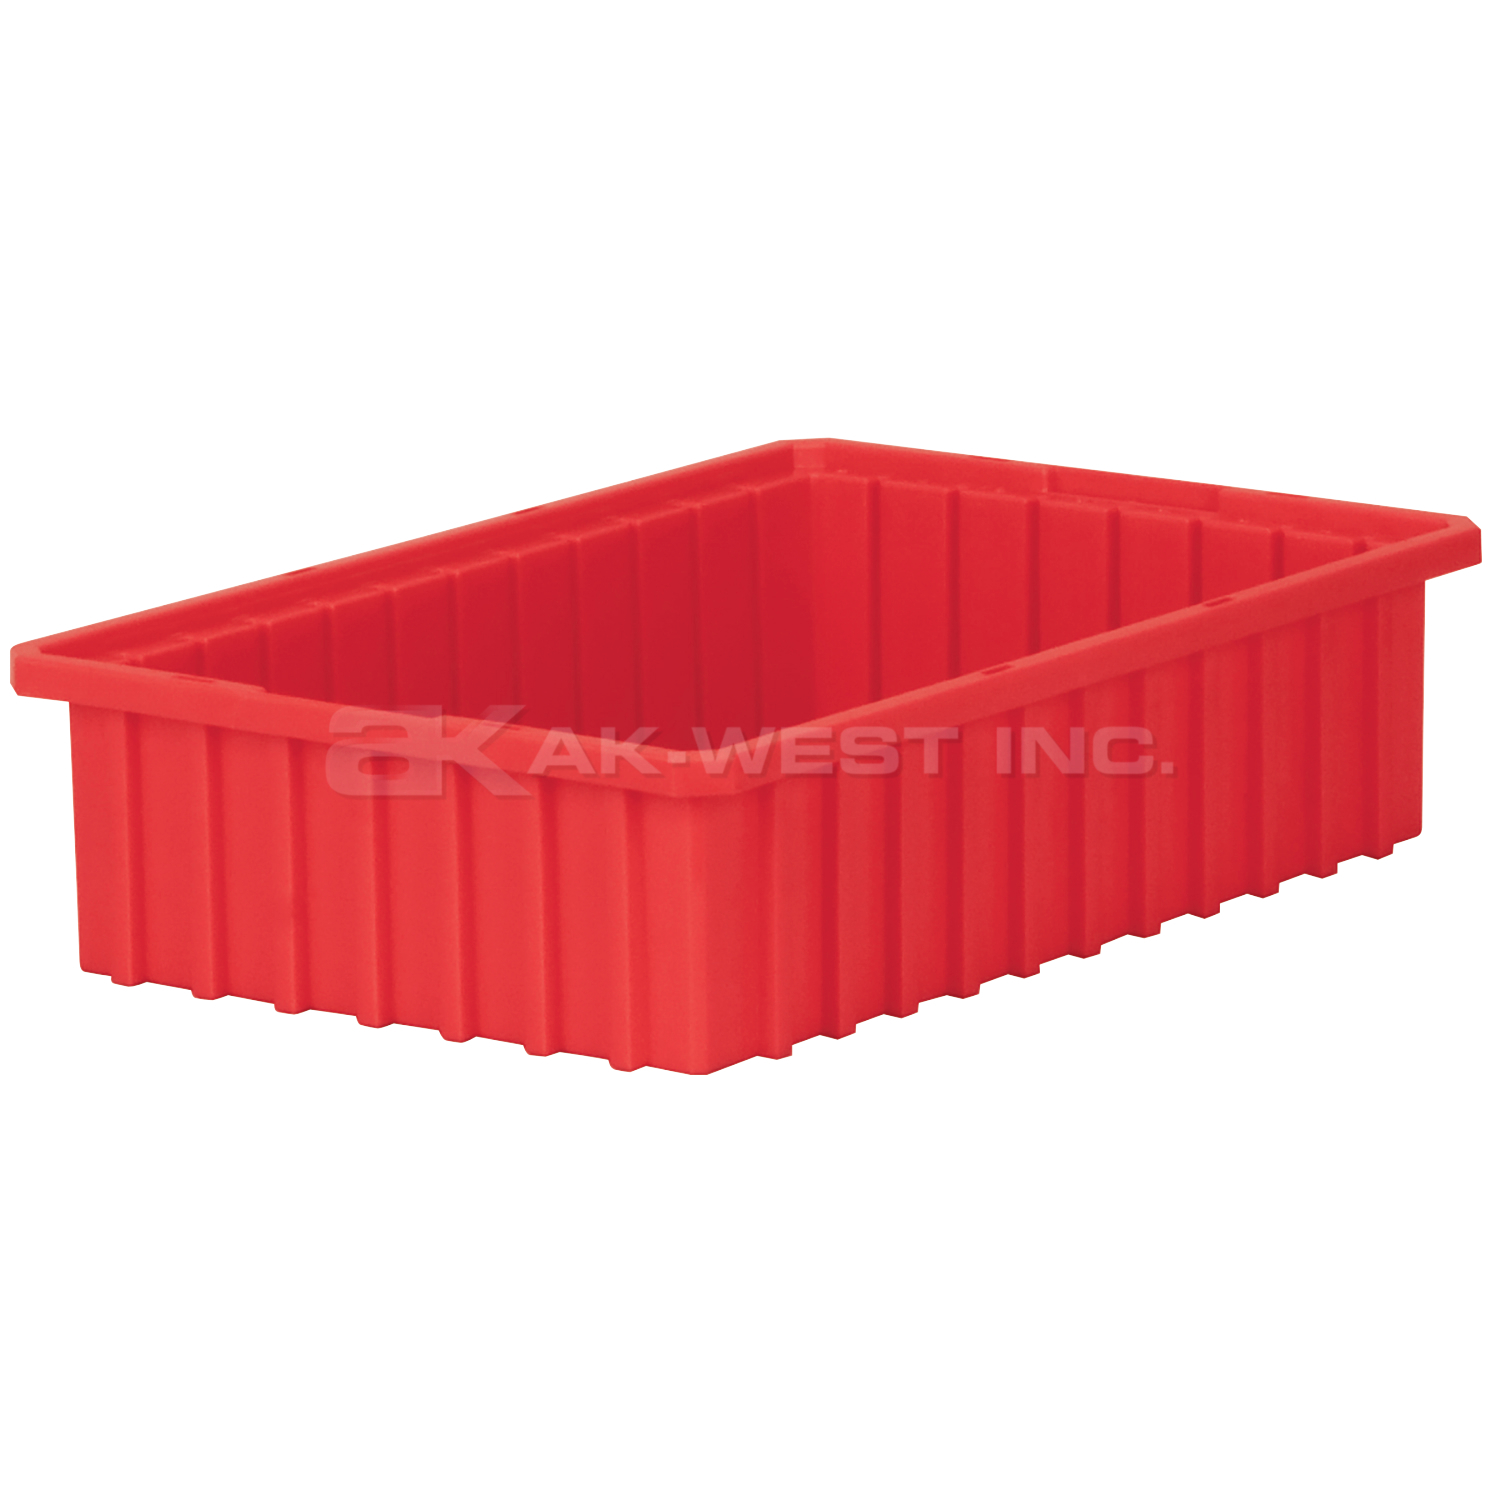 Red, 16-1/2" x 10-7/8" x 4" Dividable Grid Container (12 Per Carton)